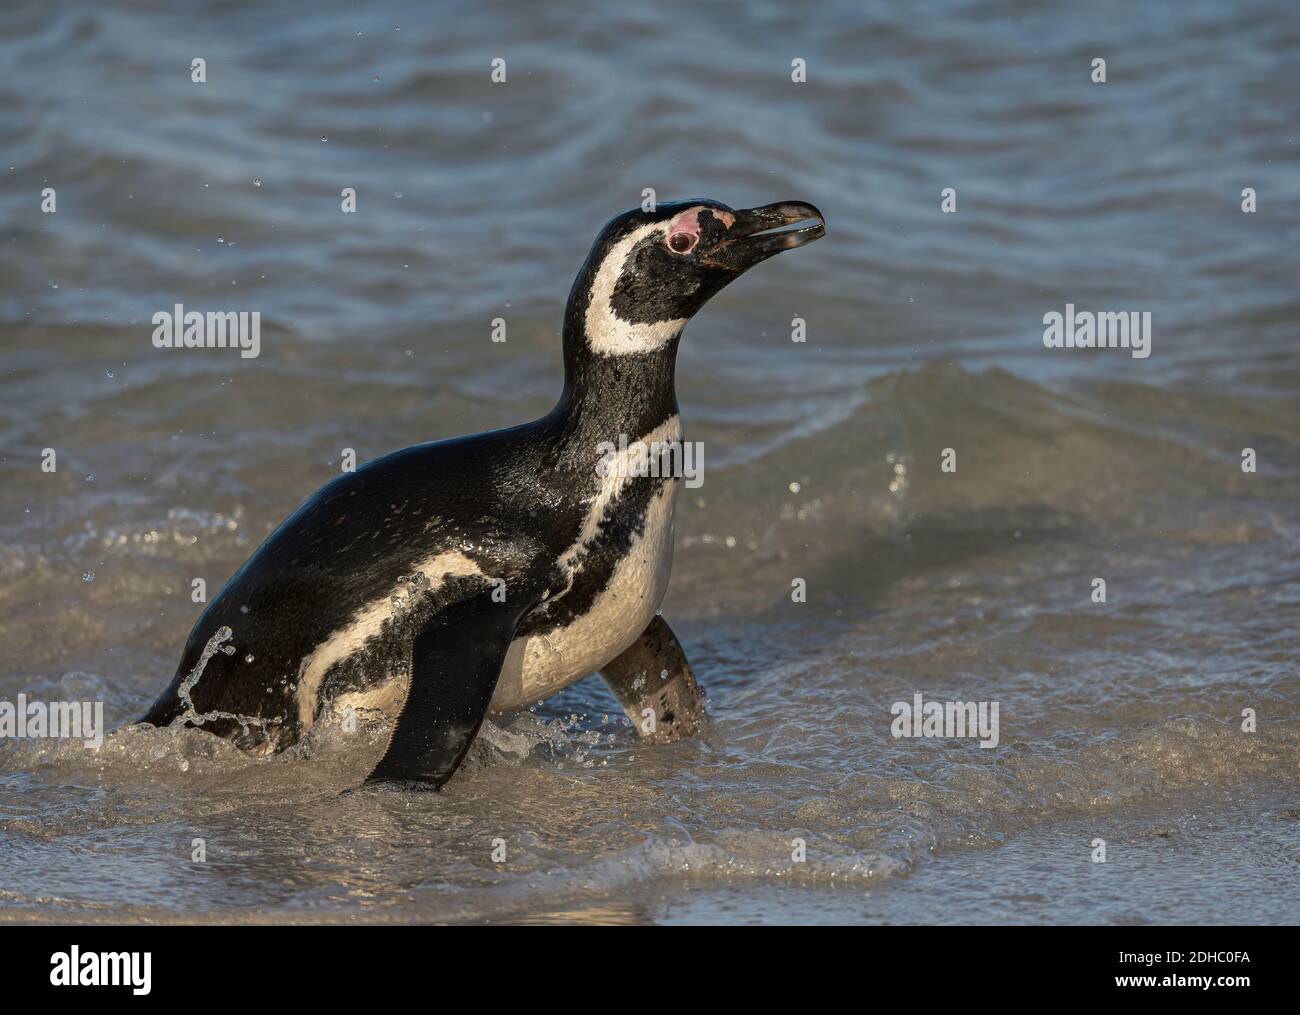 Magellanic penguin coming out of the water at the shore, close up Stock Photo